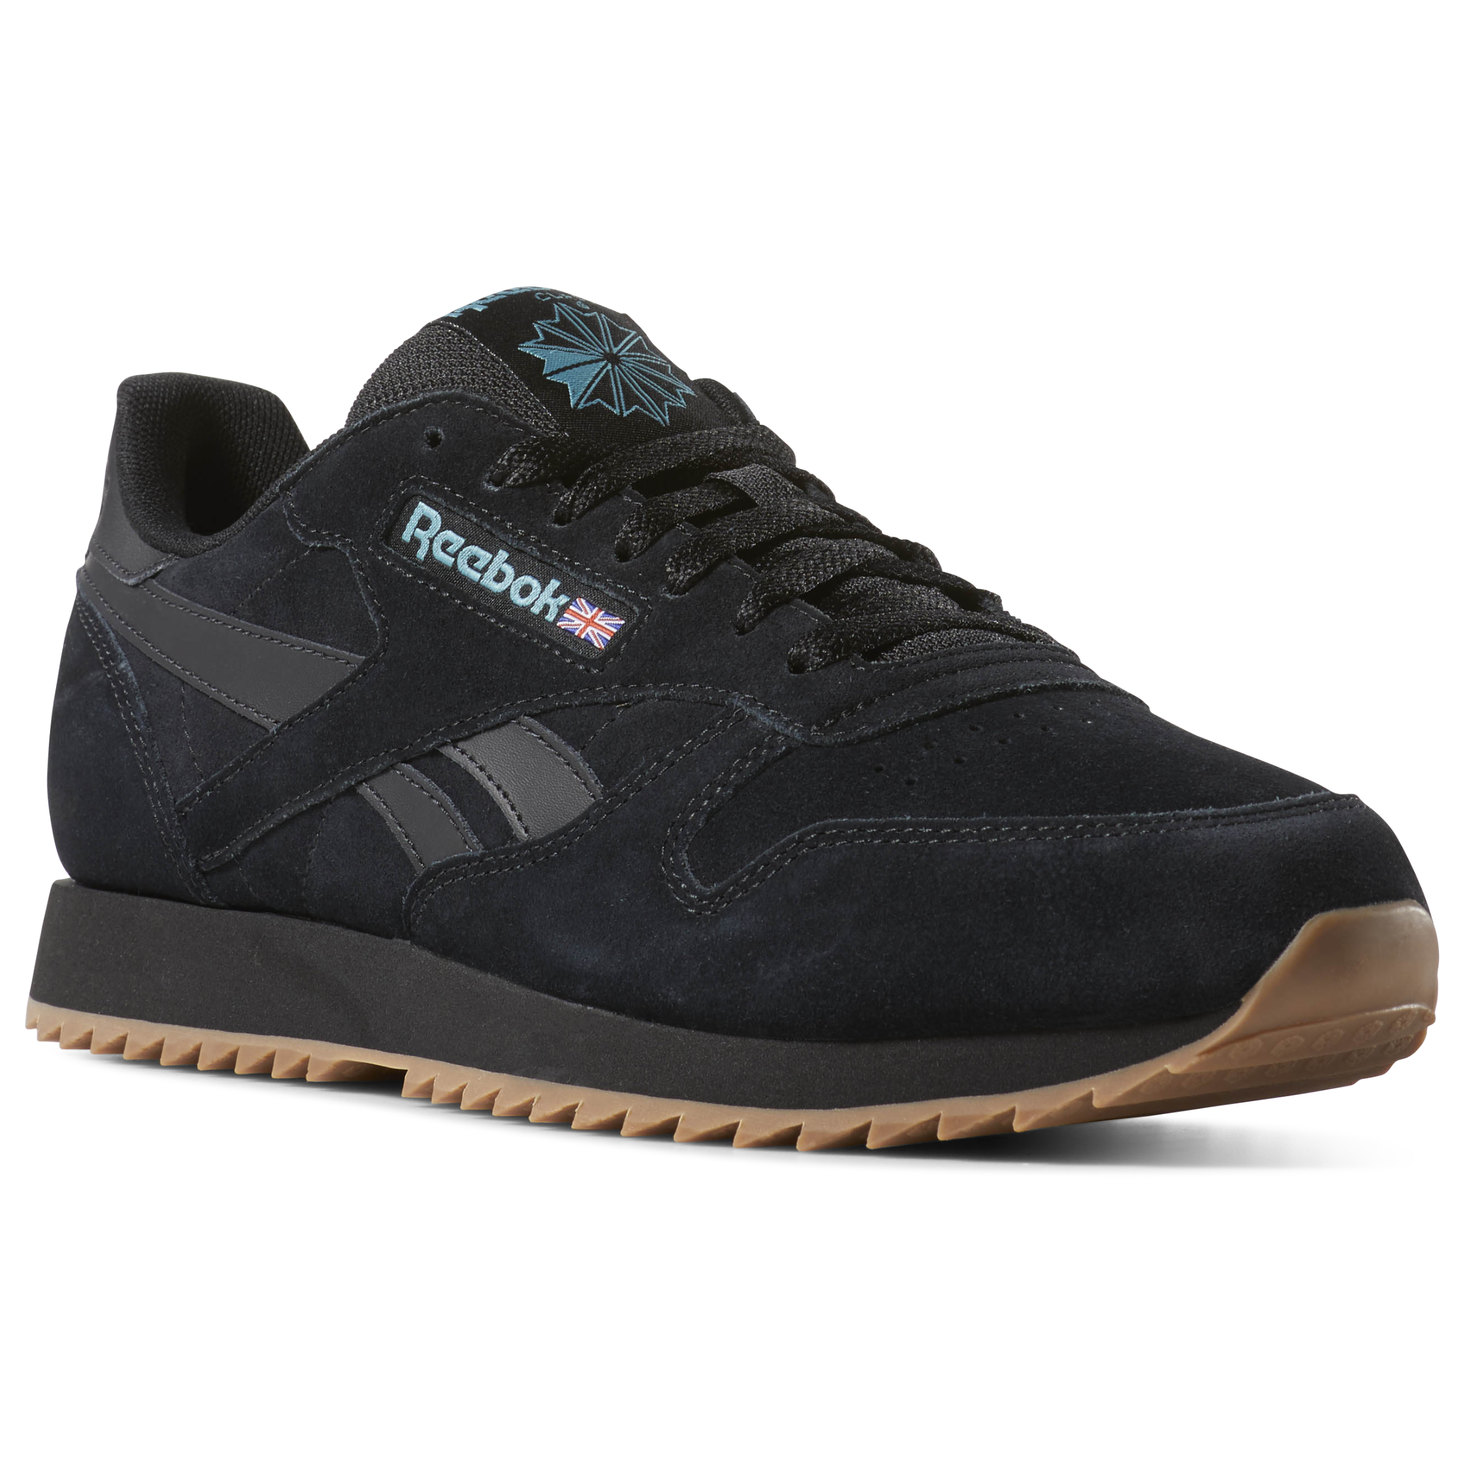 Classic Montana Cans Shoes | Reebok